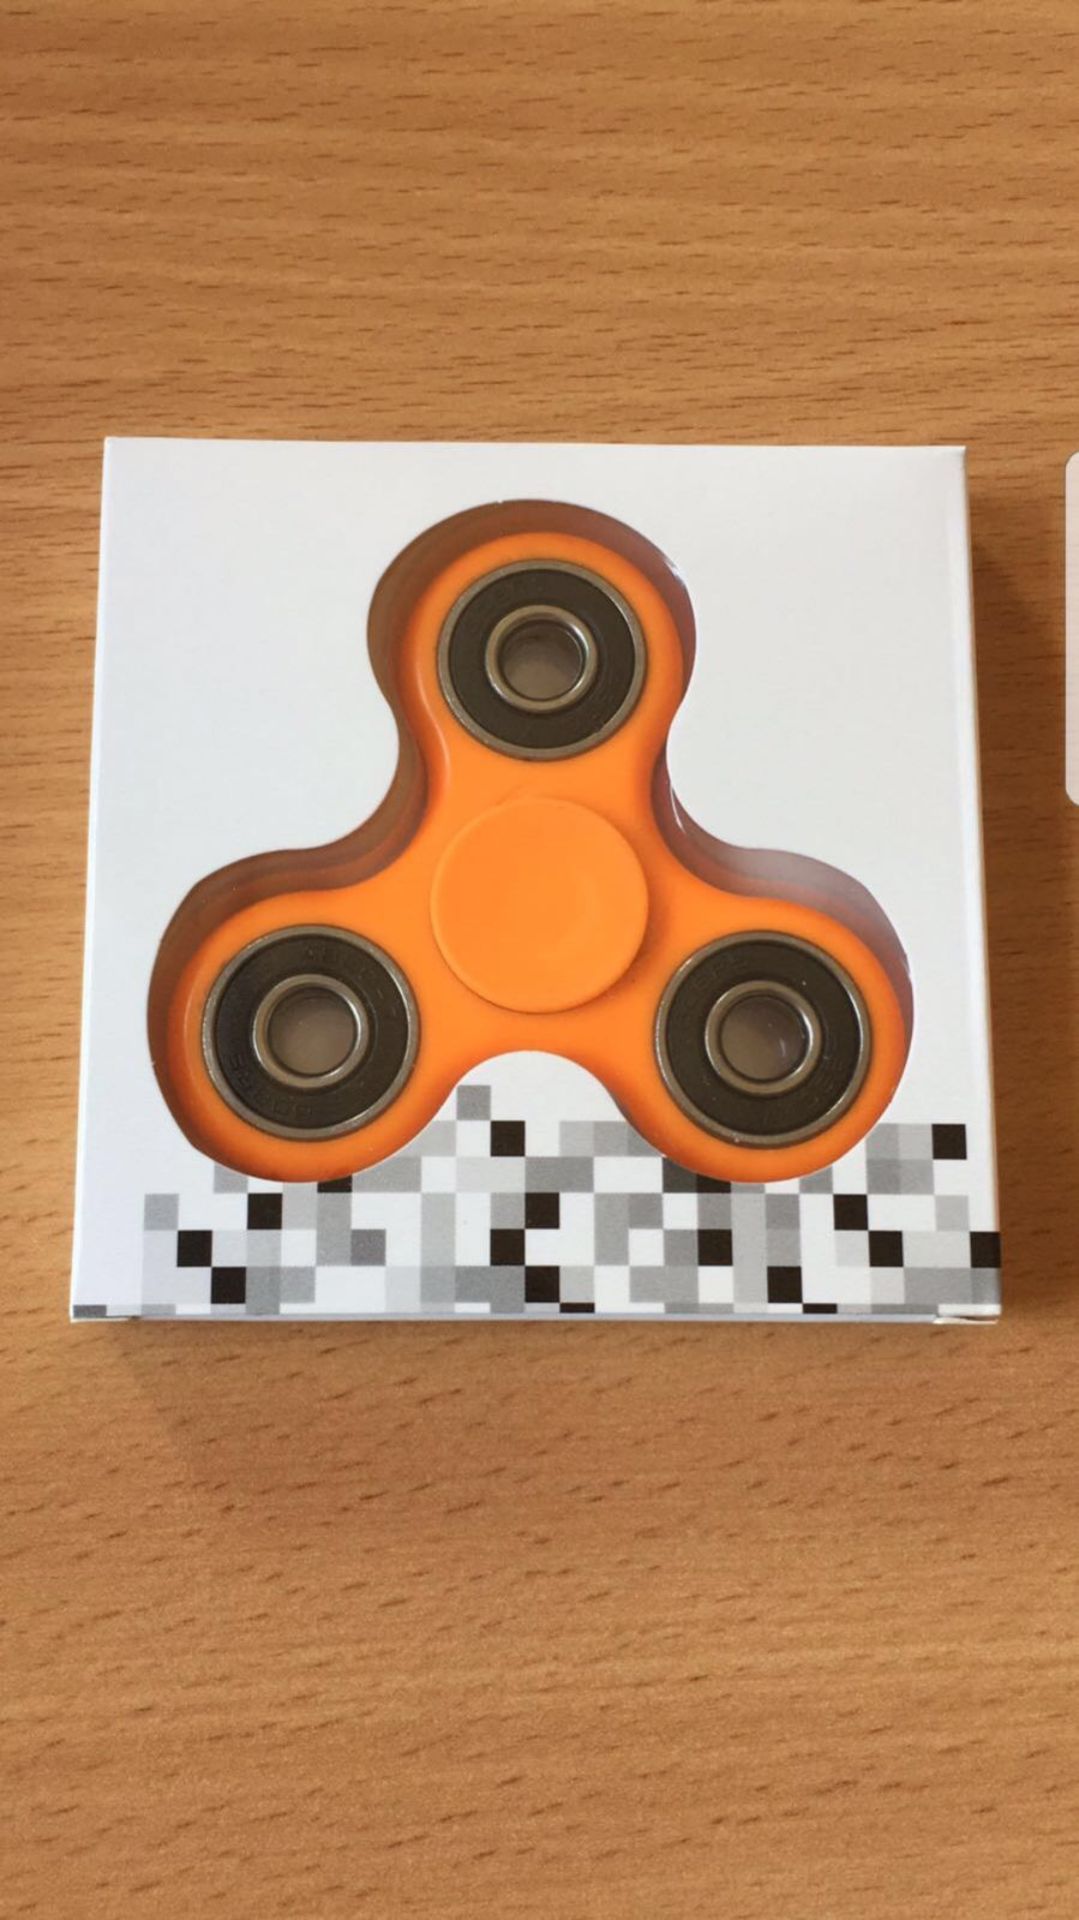 100 x Fidget Spinners. Various Colours Including: Black, Orange, Blue & Yellow. RRP £9.99 each. Come